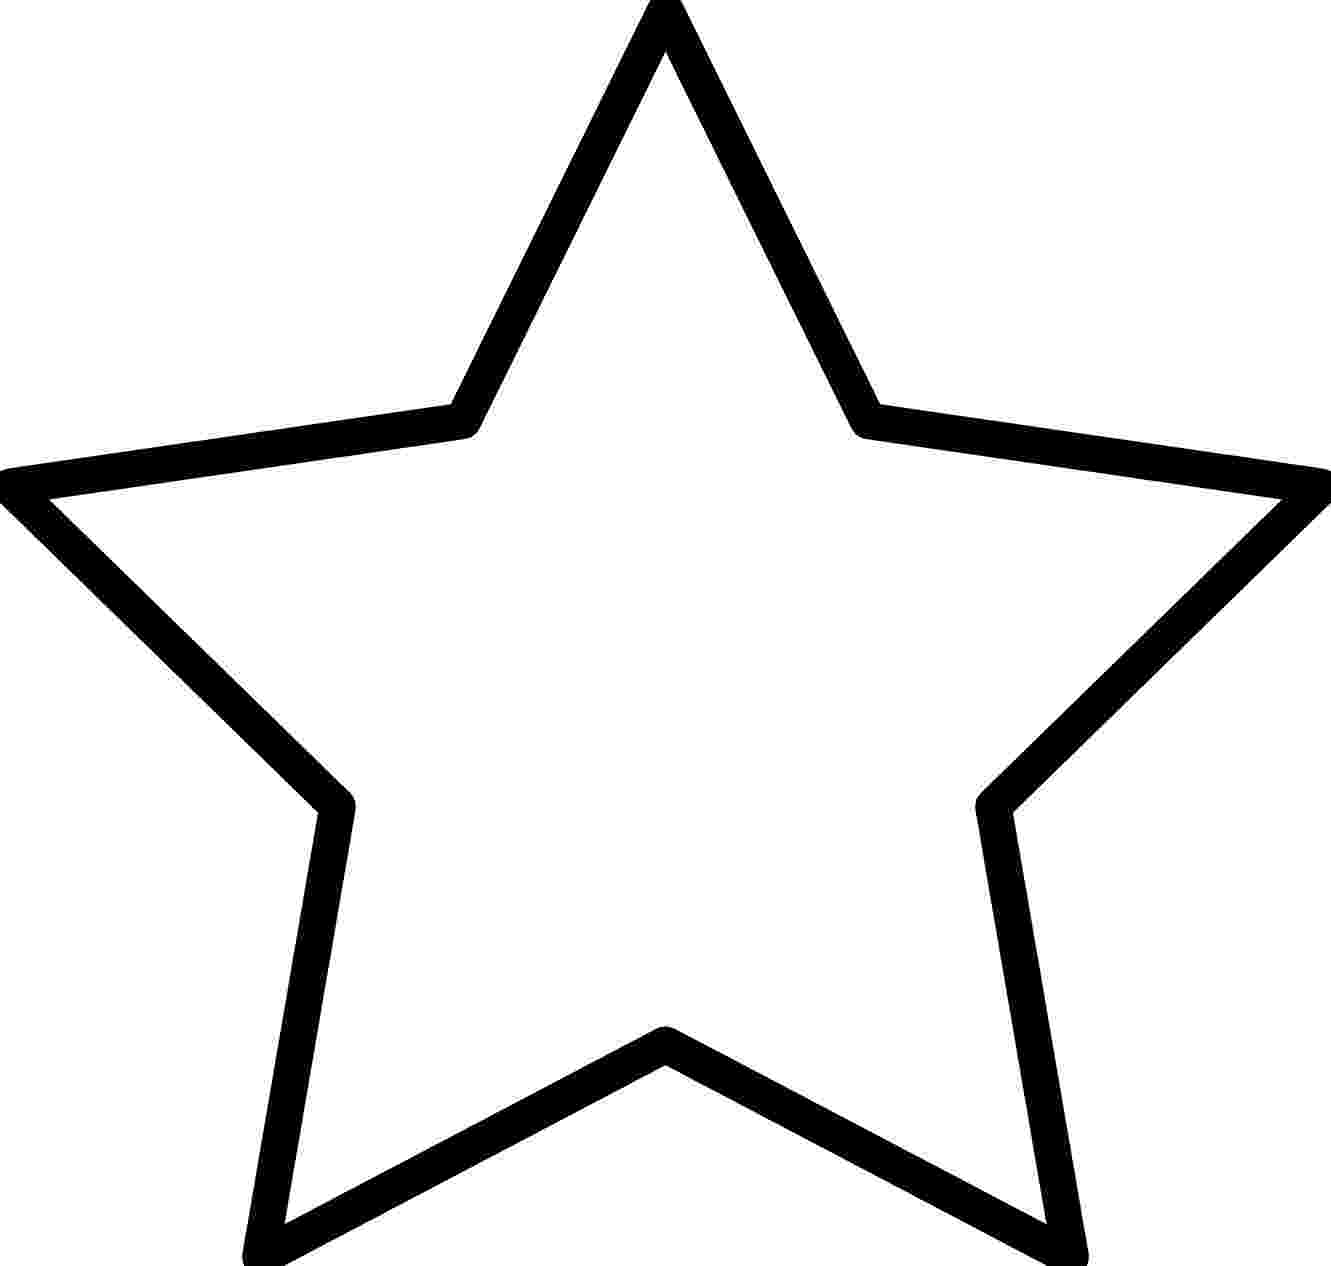 colouring pages for stars free printable star coloring pages for kids stars colouring pages for 